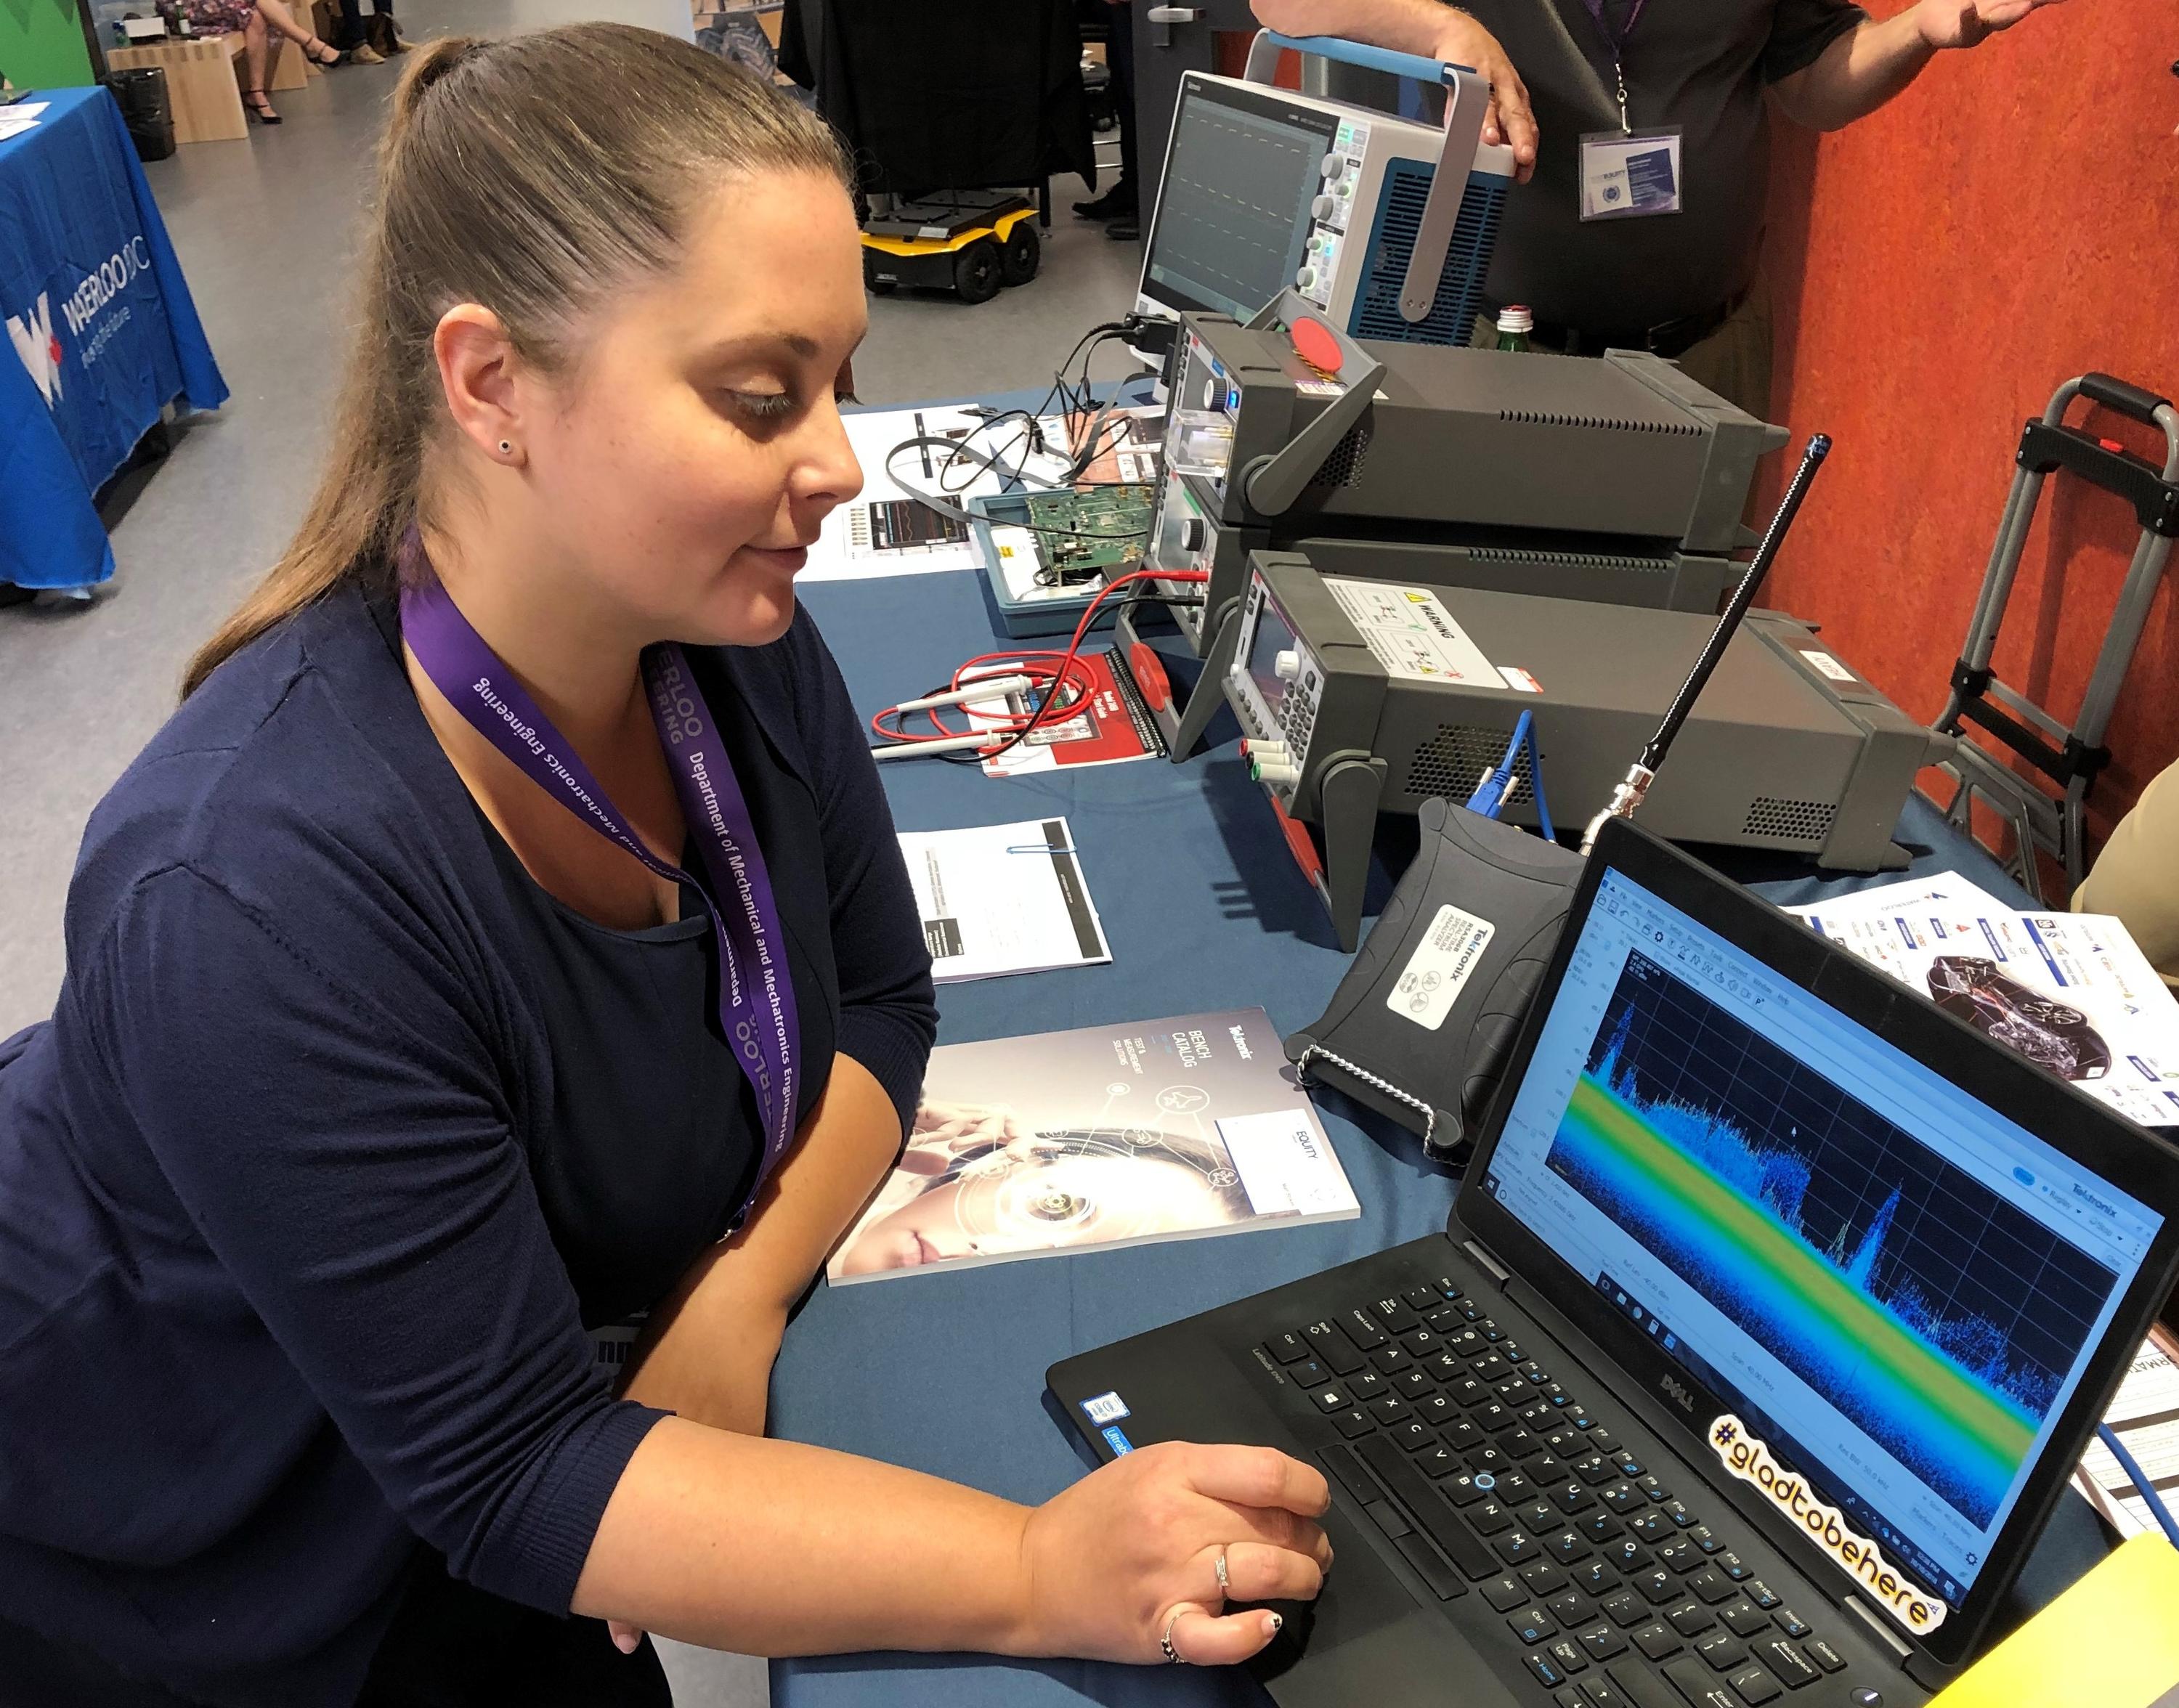 Jennifer Biesinger of Tektronix, one of the industry exhibitors at the 2018 AutoTech Symposium, displays a real-time representation of electronic interference at the one-day event.